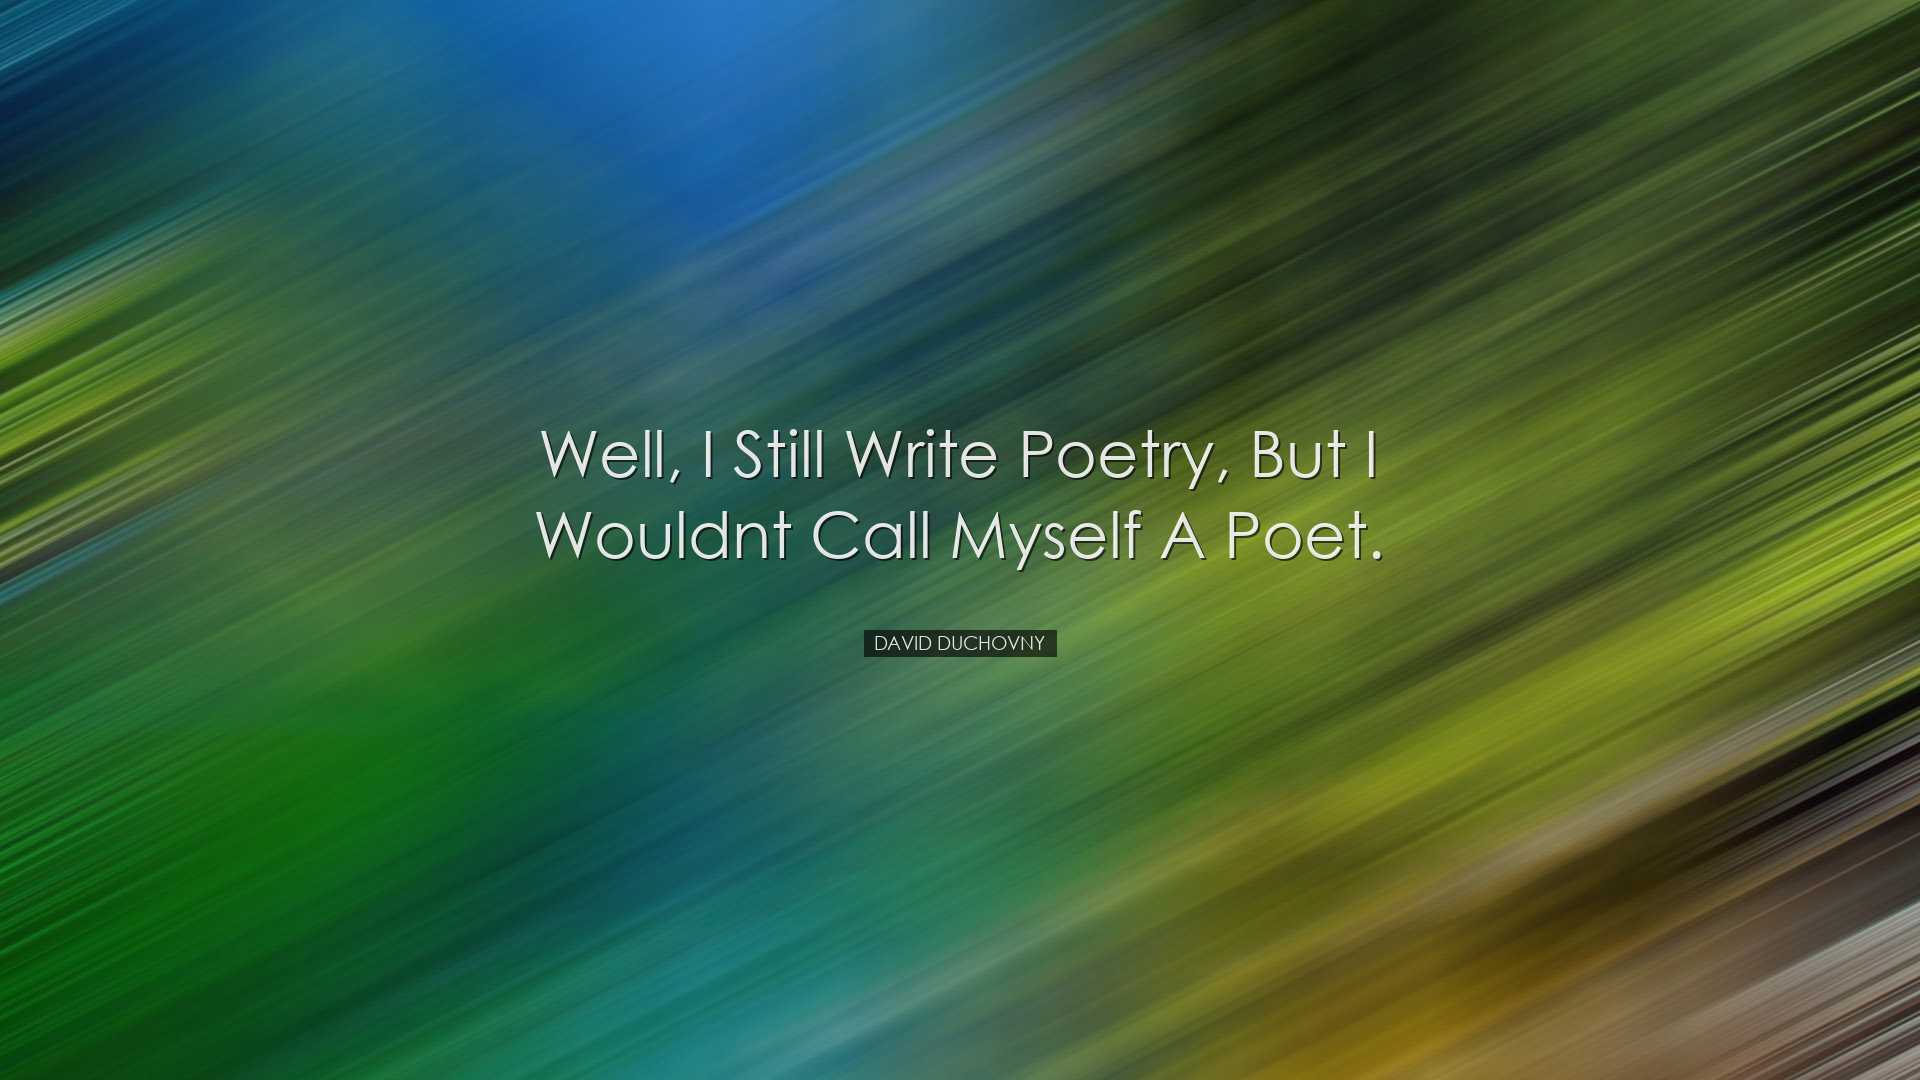 Well, I still write poetry, but I wouldnt call myself a poet. - Da